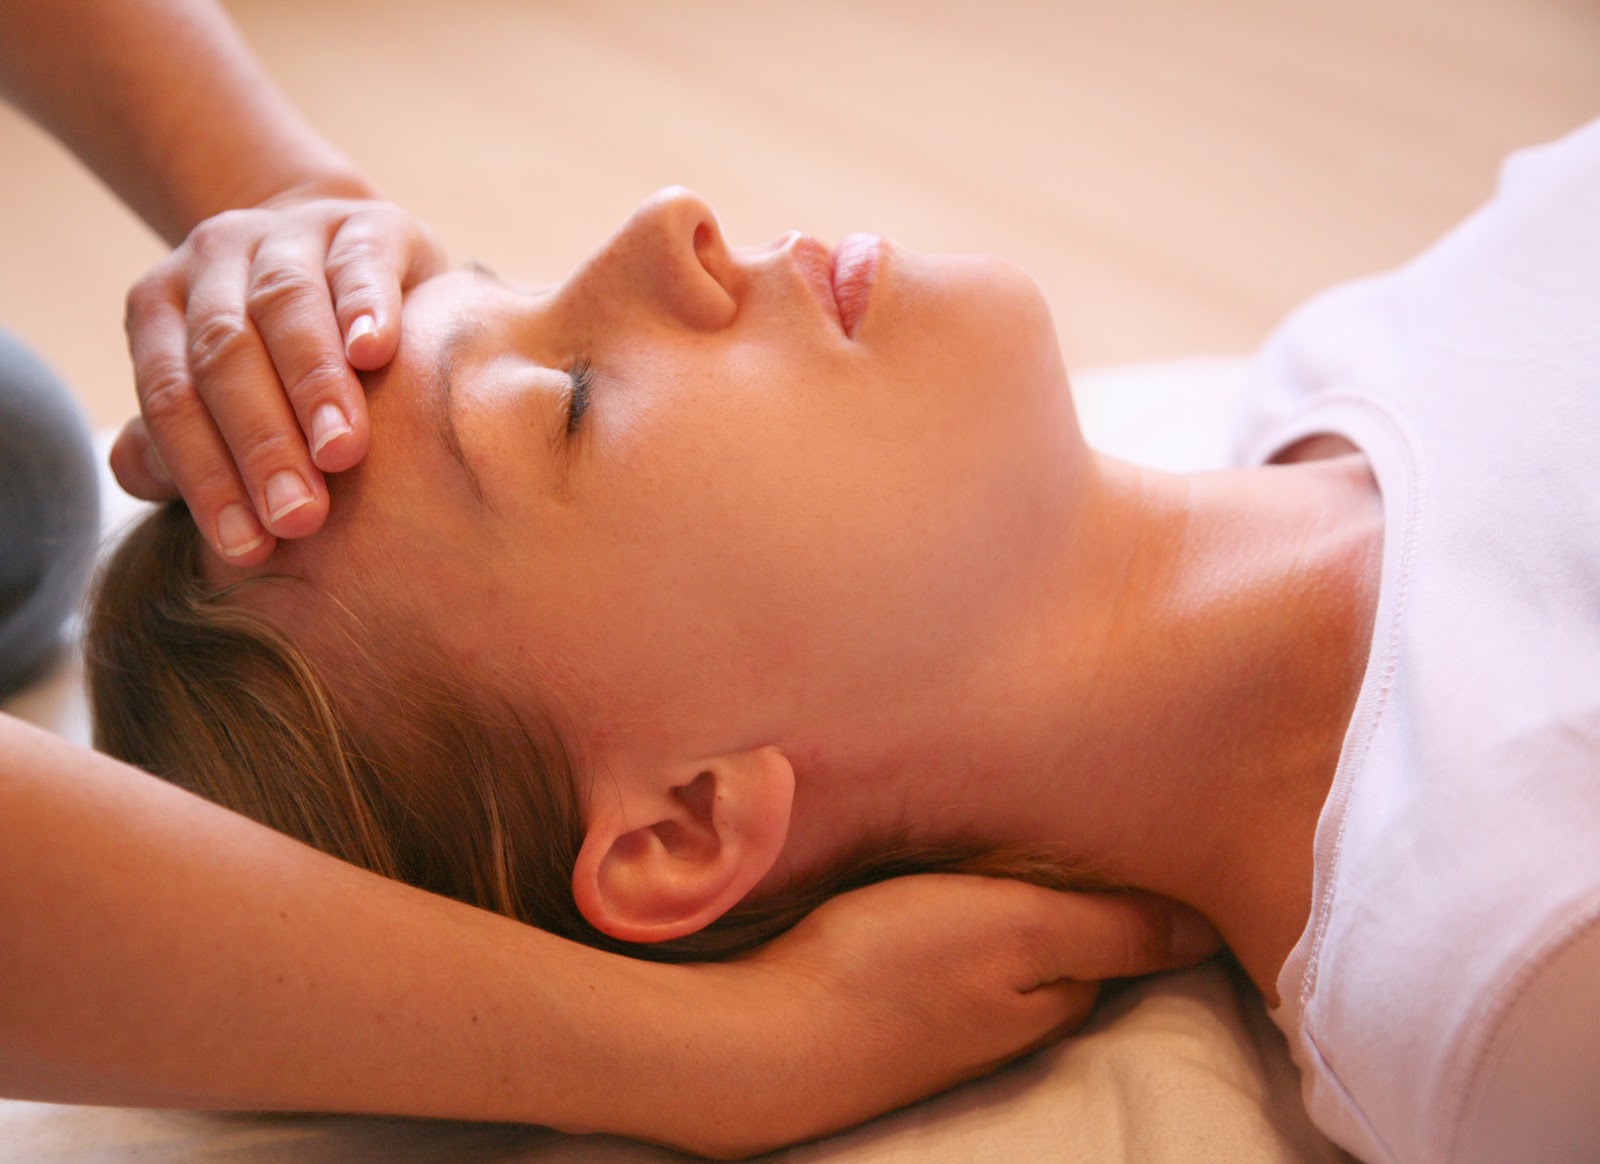 Zero Balancing and Craniosacral Therapy at SeaRhythms in Charlottesville, VA 22911, Tammy Mundy, LMT